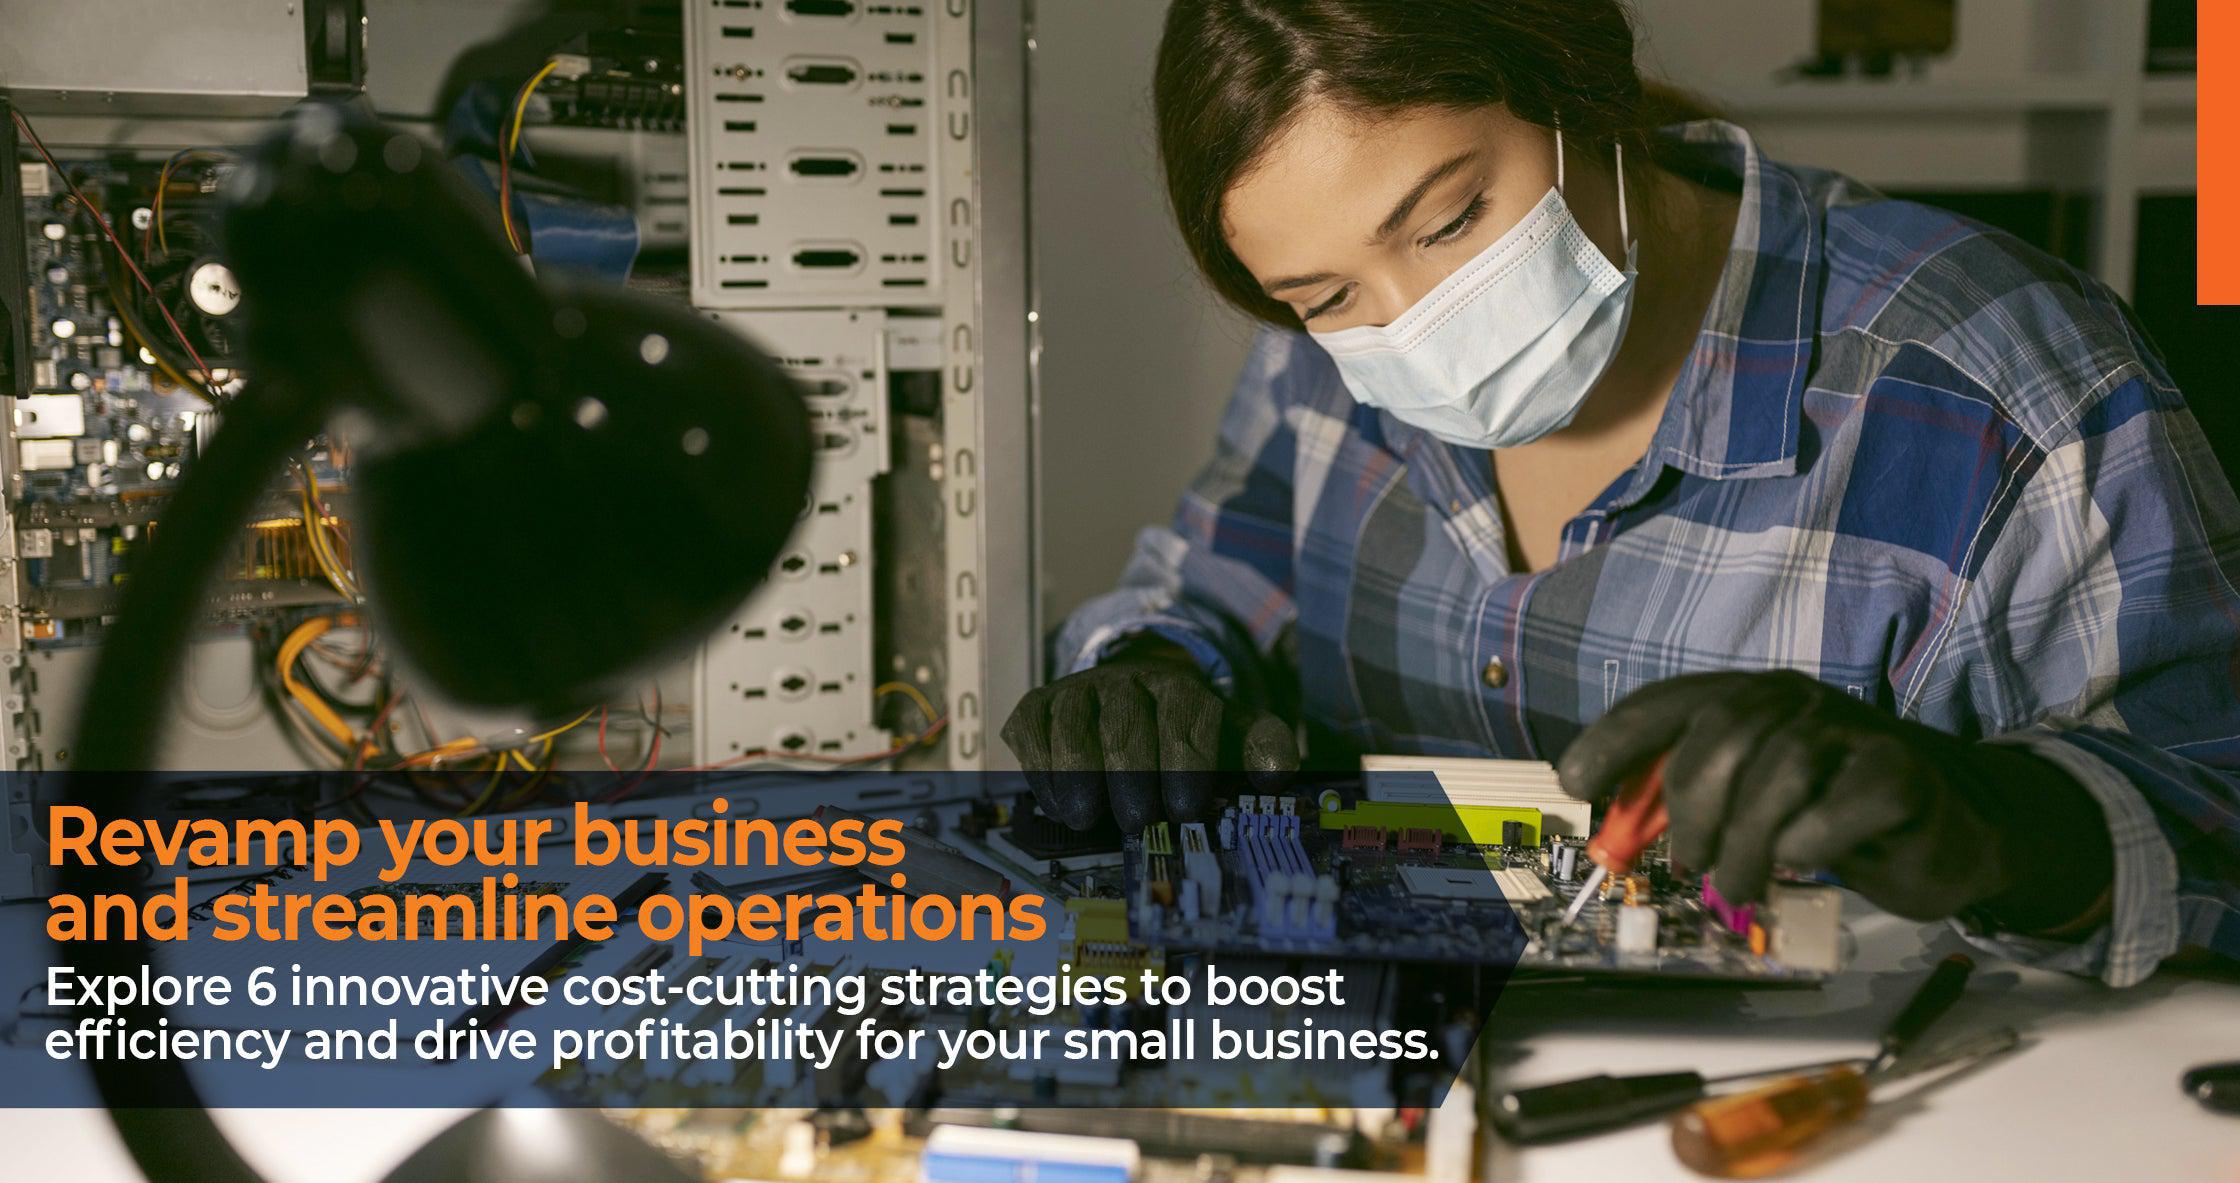 Revamp your business and streamline operations! Explore 6 innovative cost-cutting strategies to boost efficiency and drive profitability for your small business.